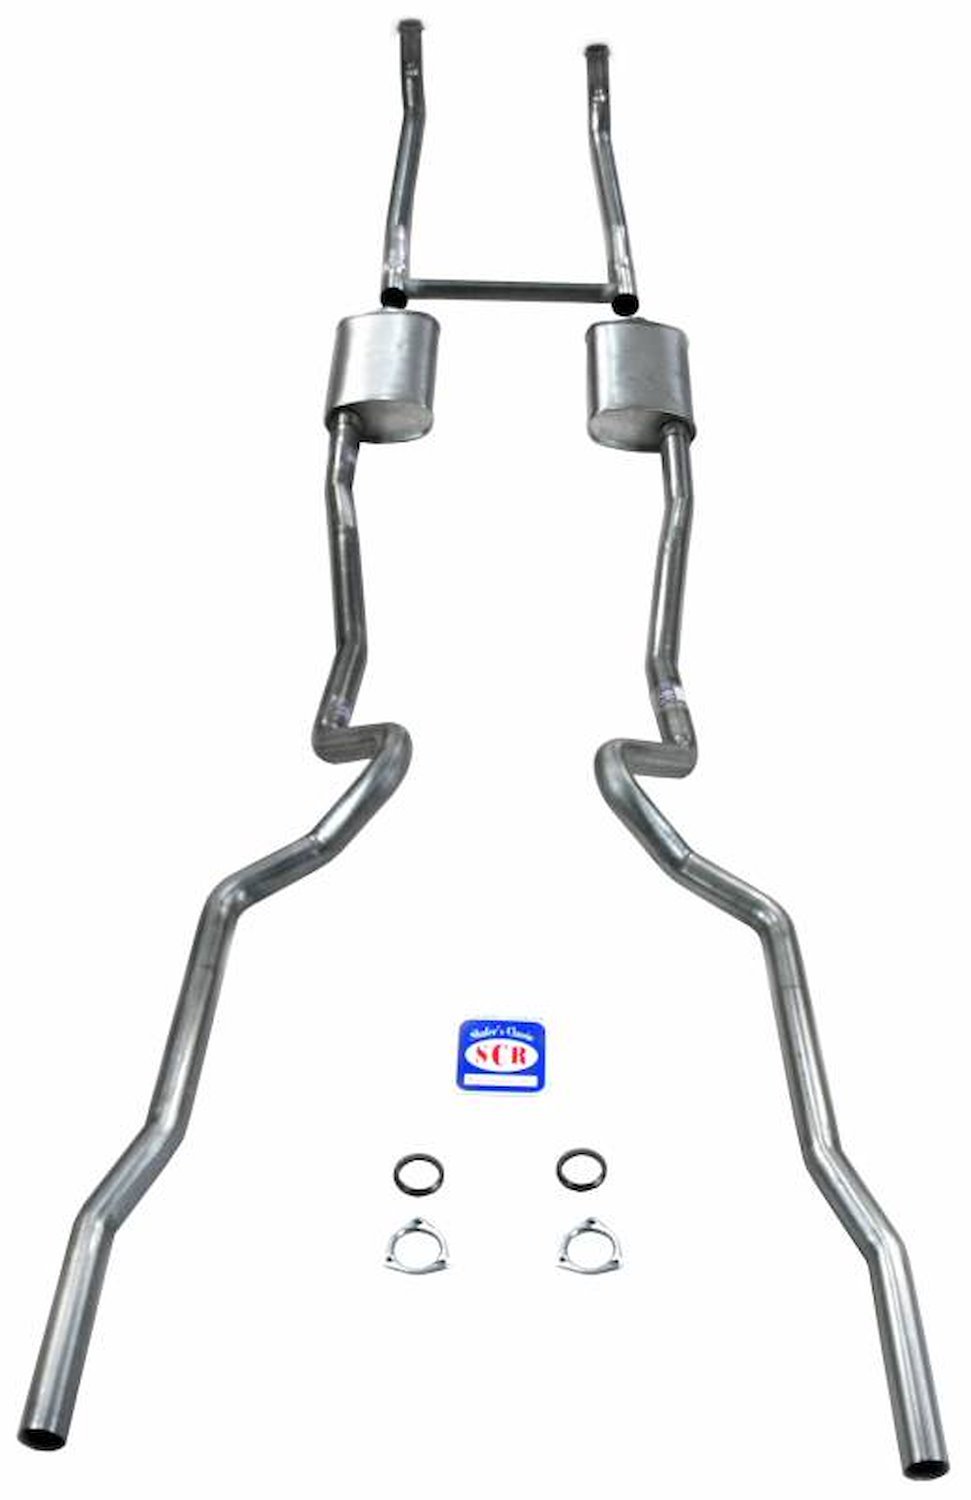 63109S 1955-1957 Chevrolet Full-Size 2-1/2 in. Dual Turbo Small Block Exhaust System, 304 Stainless Steel